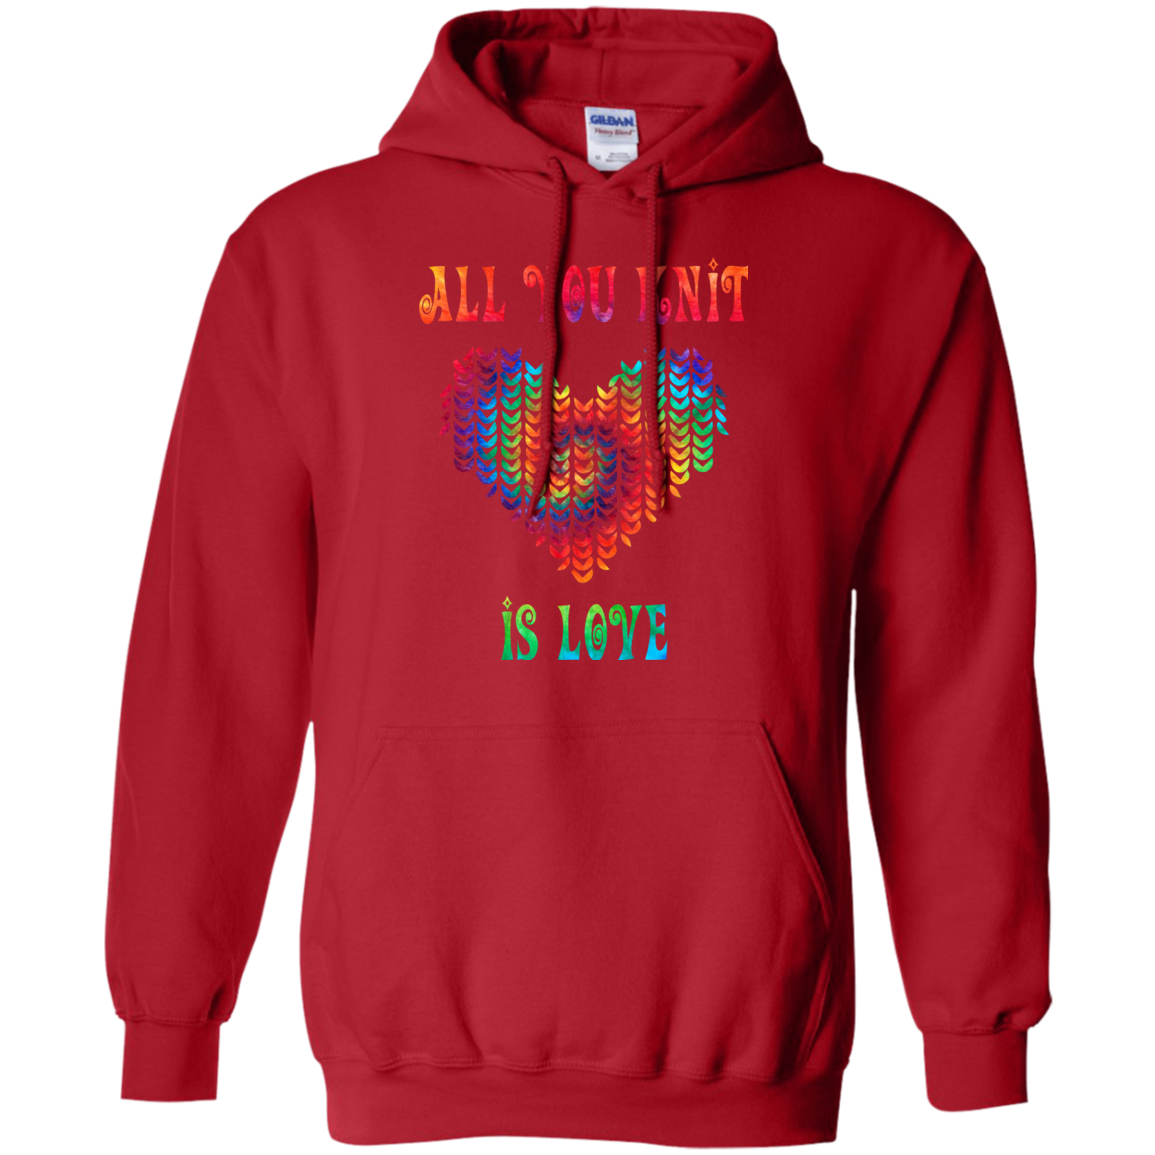 All You Knit Heart Pullover Hoodie